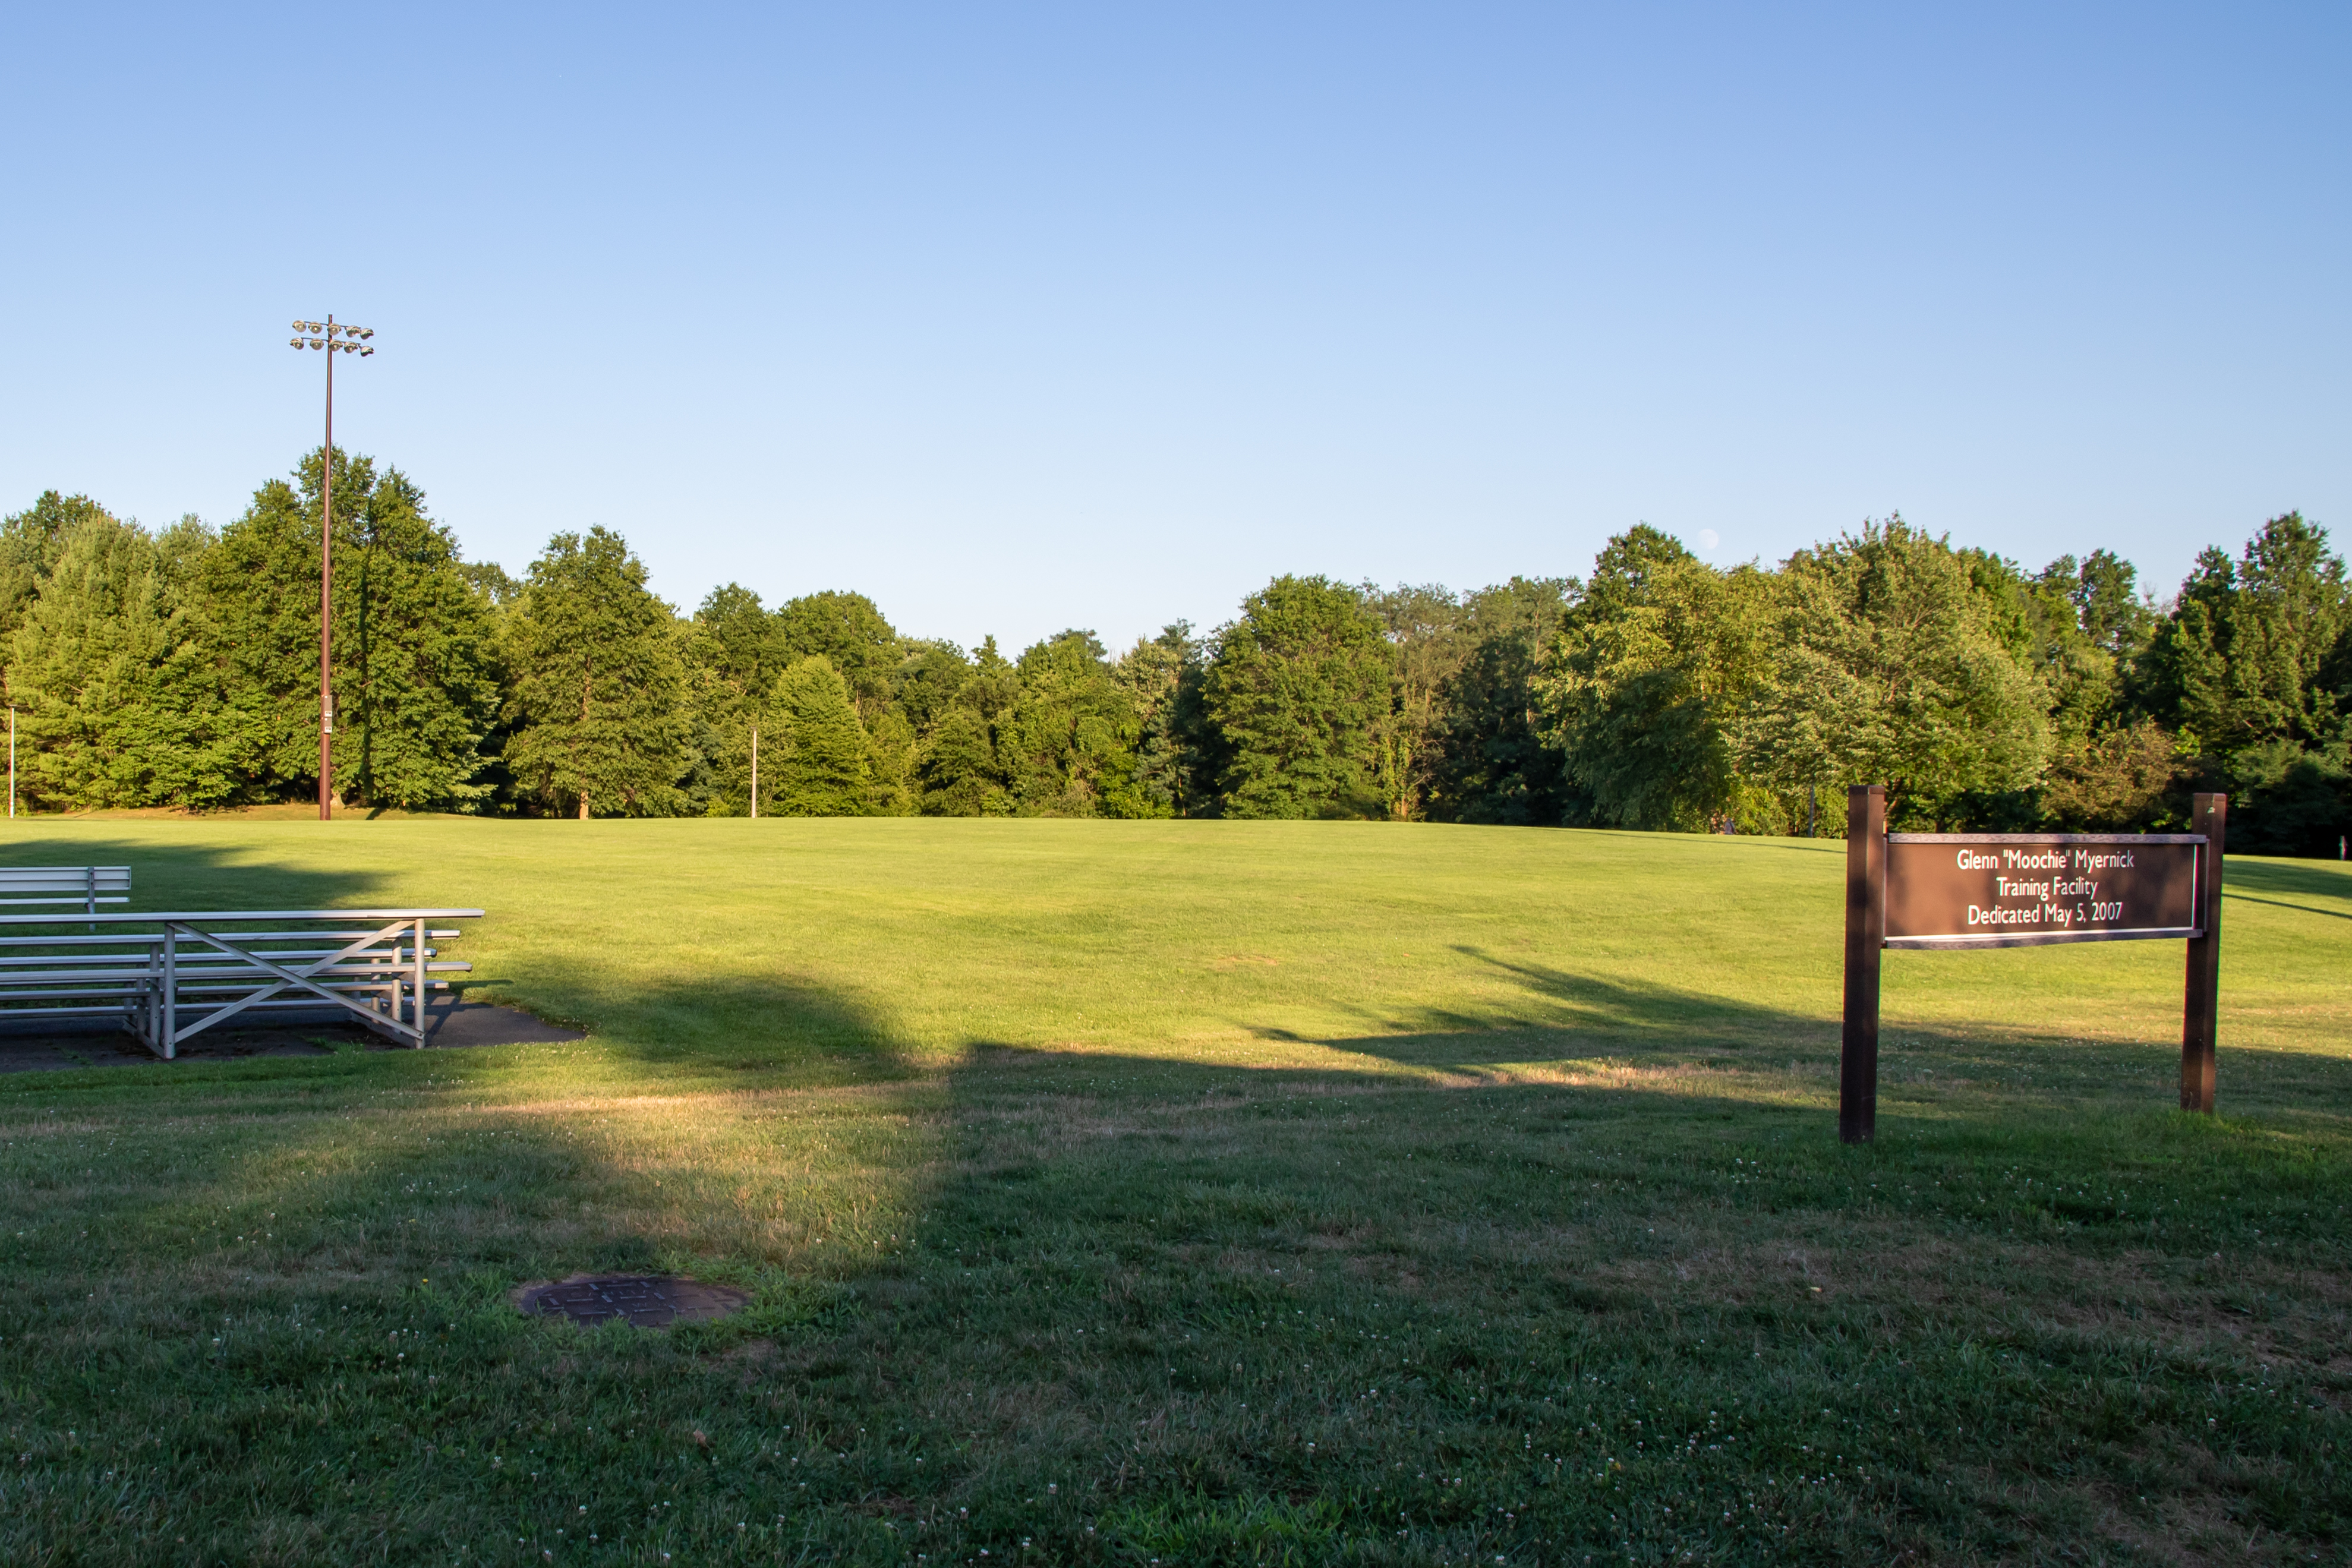 lawrence township recreation department